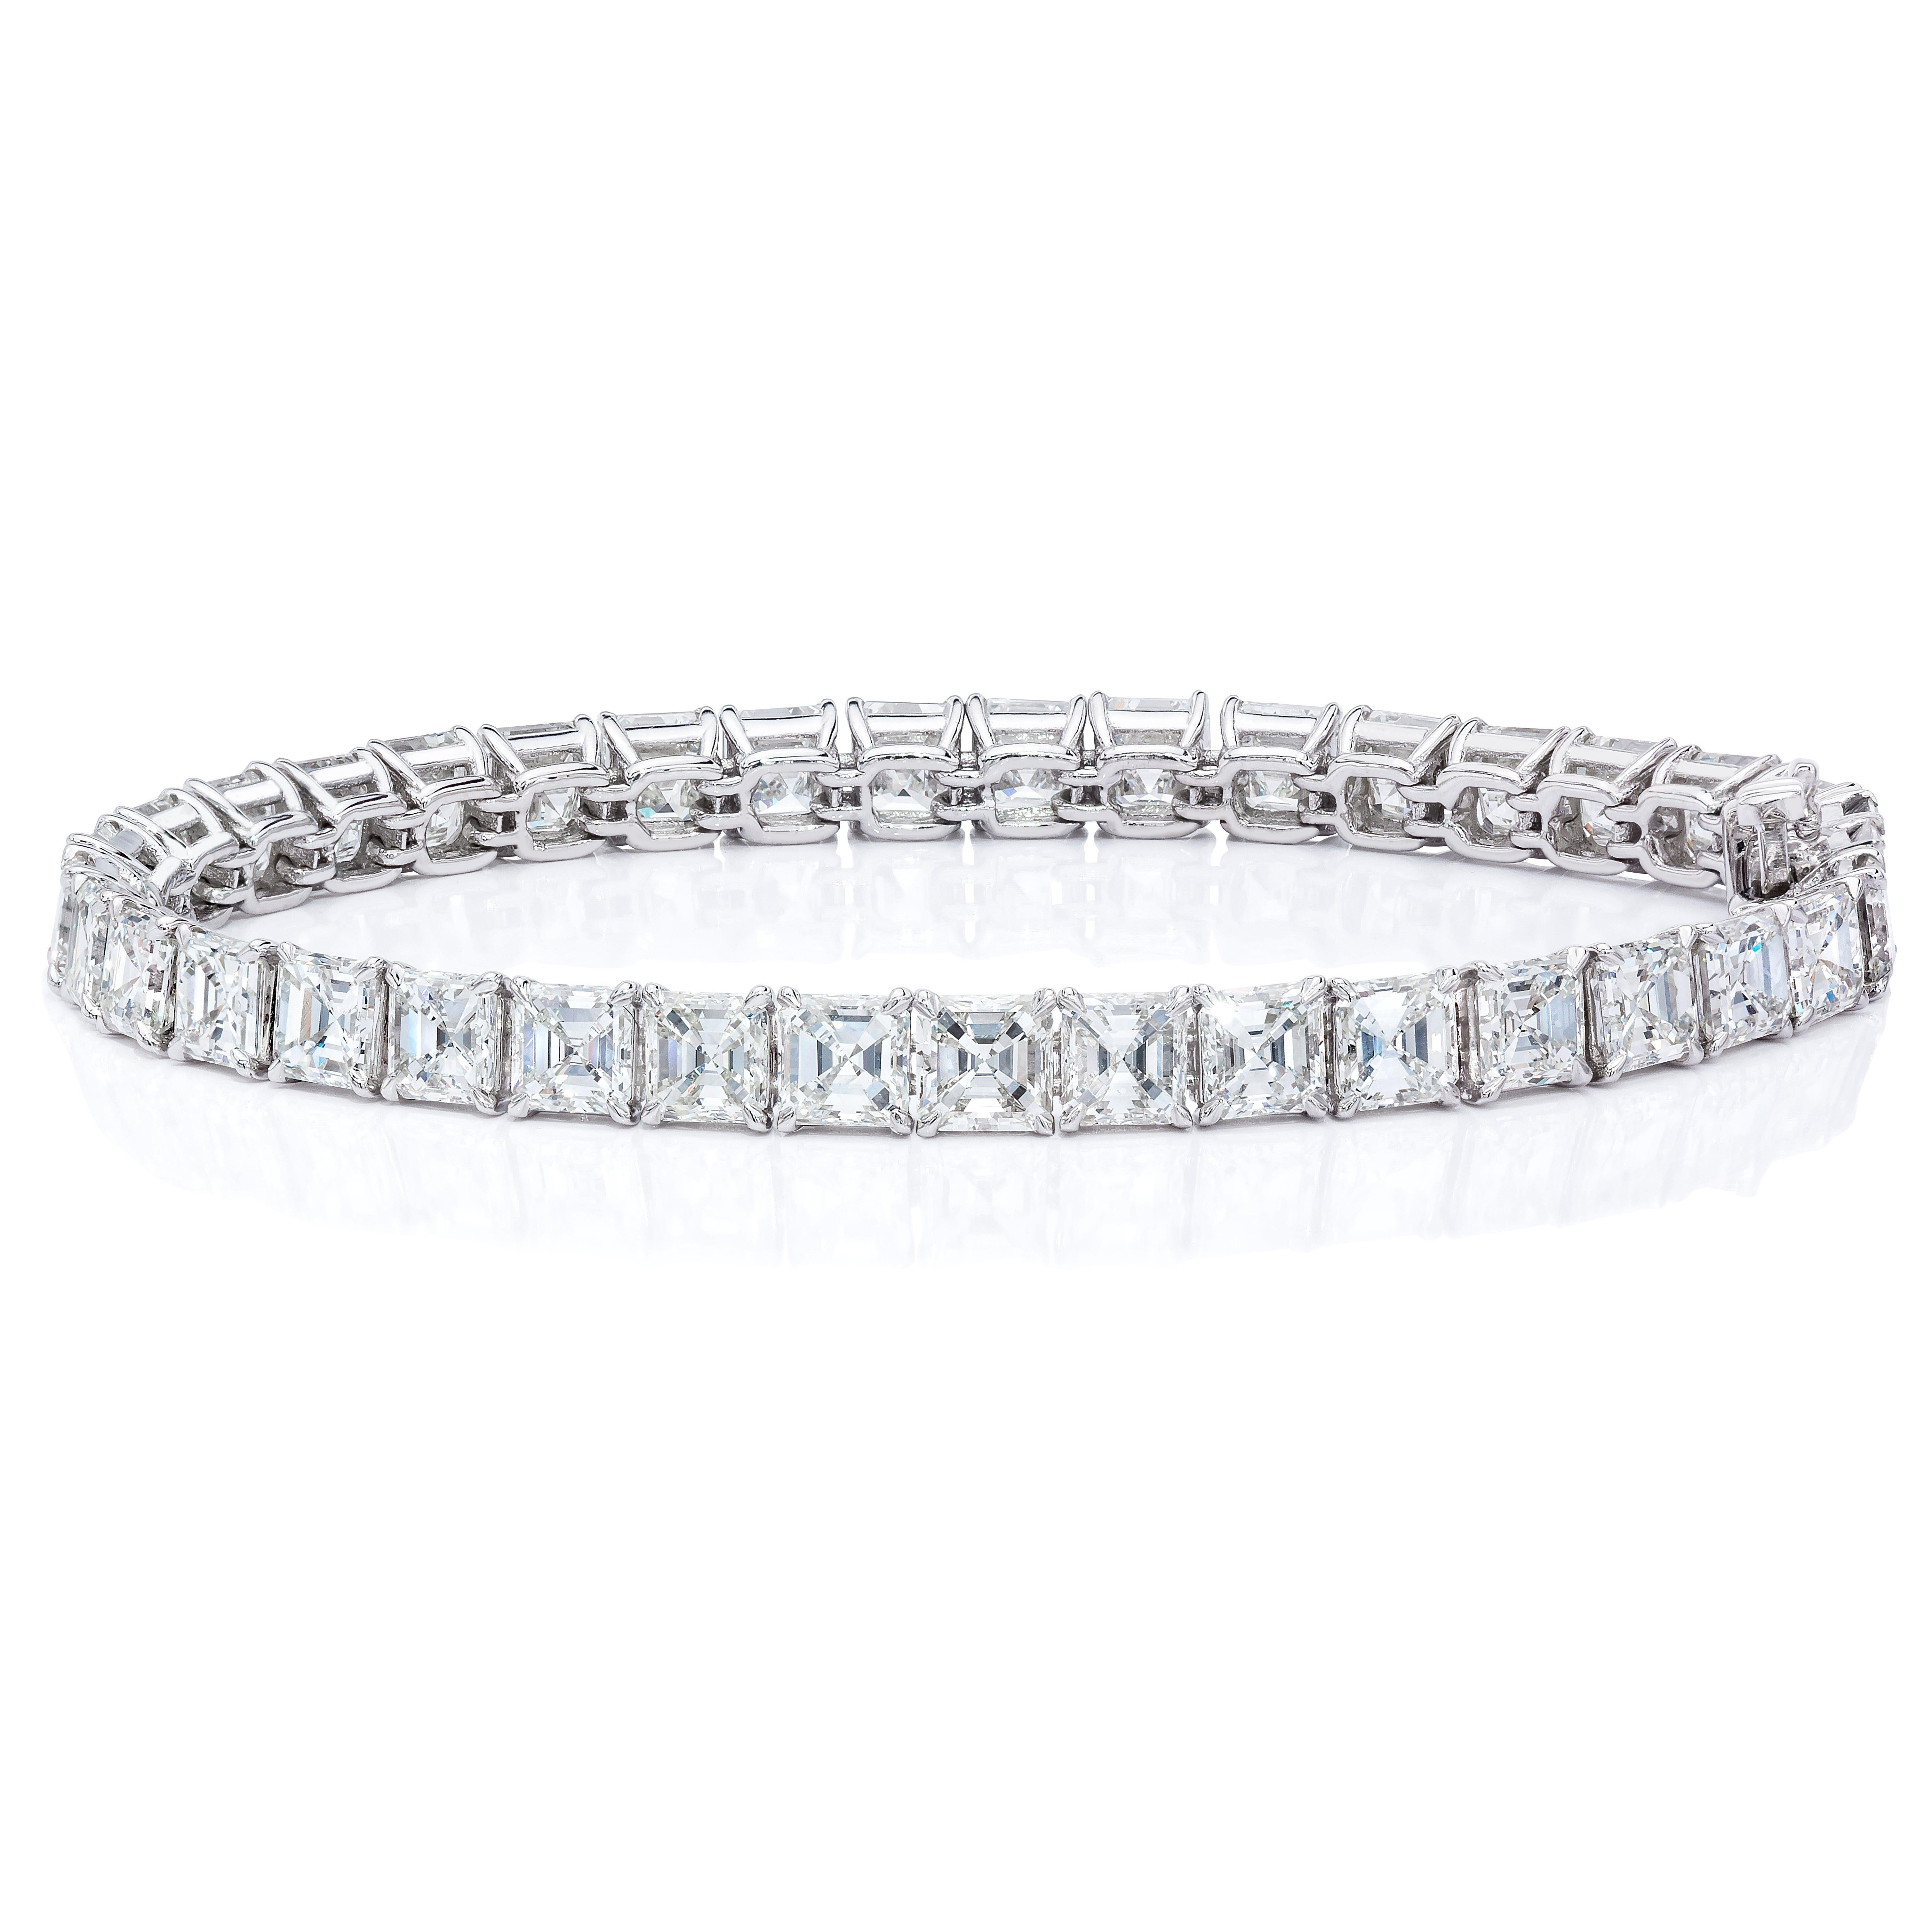 This beautiful bracelet features 37 perfectly matched Asscher Cuts in a single line Tennis Bracelet setting totaling 16.22 Carats.
Each Stone weights approximately 43points each.
Set in 18 Karat White Gold.
Measures 6.75 inches.